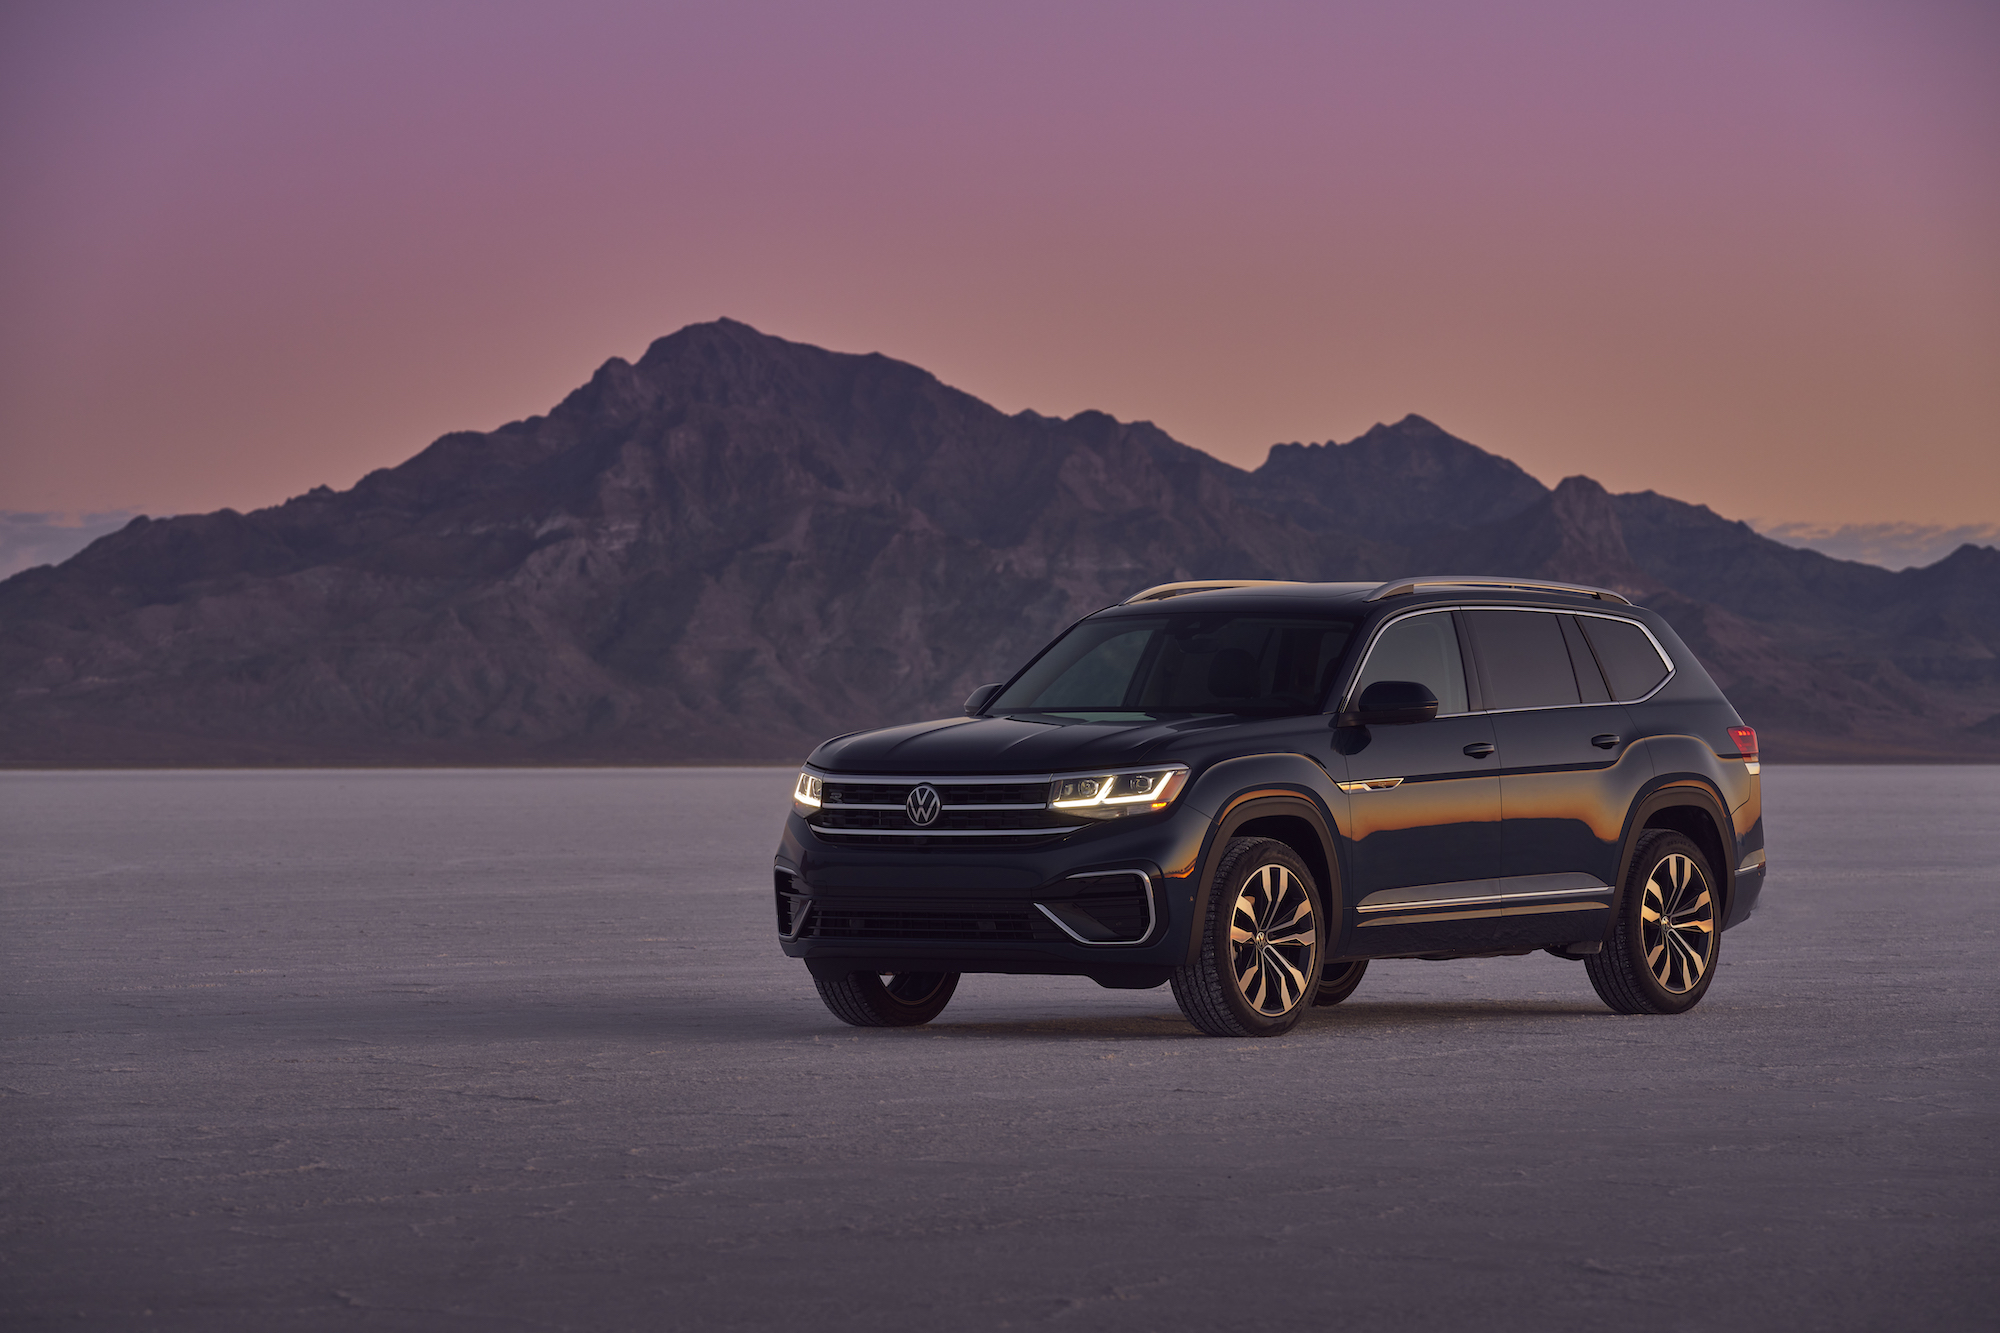 A black 2021 Volkswagen Atlas midsize SUV which the rumored Volkswagen ID.8 will likely be based on